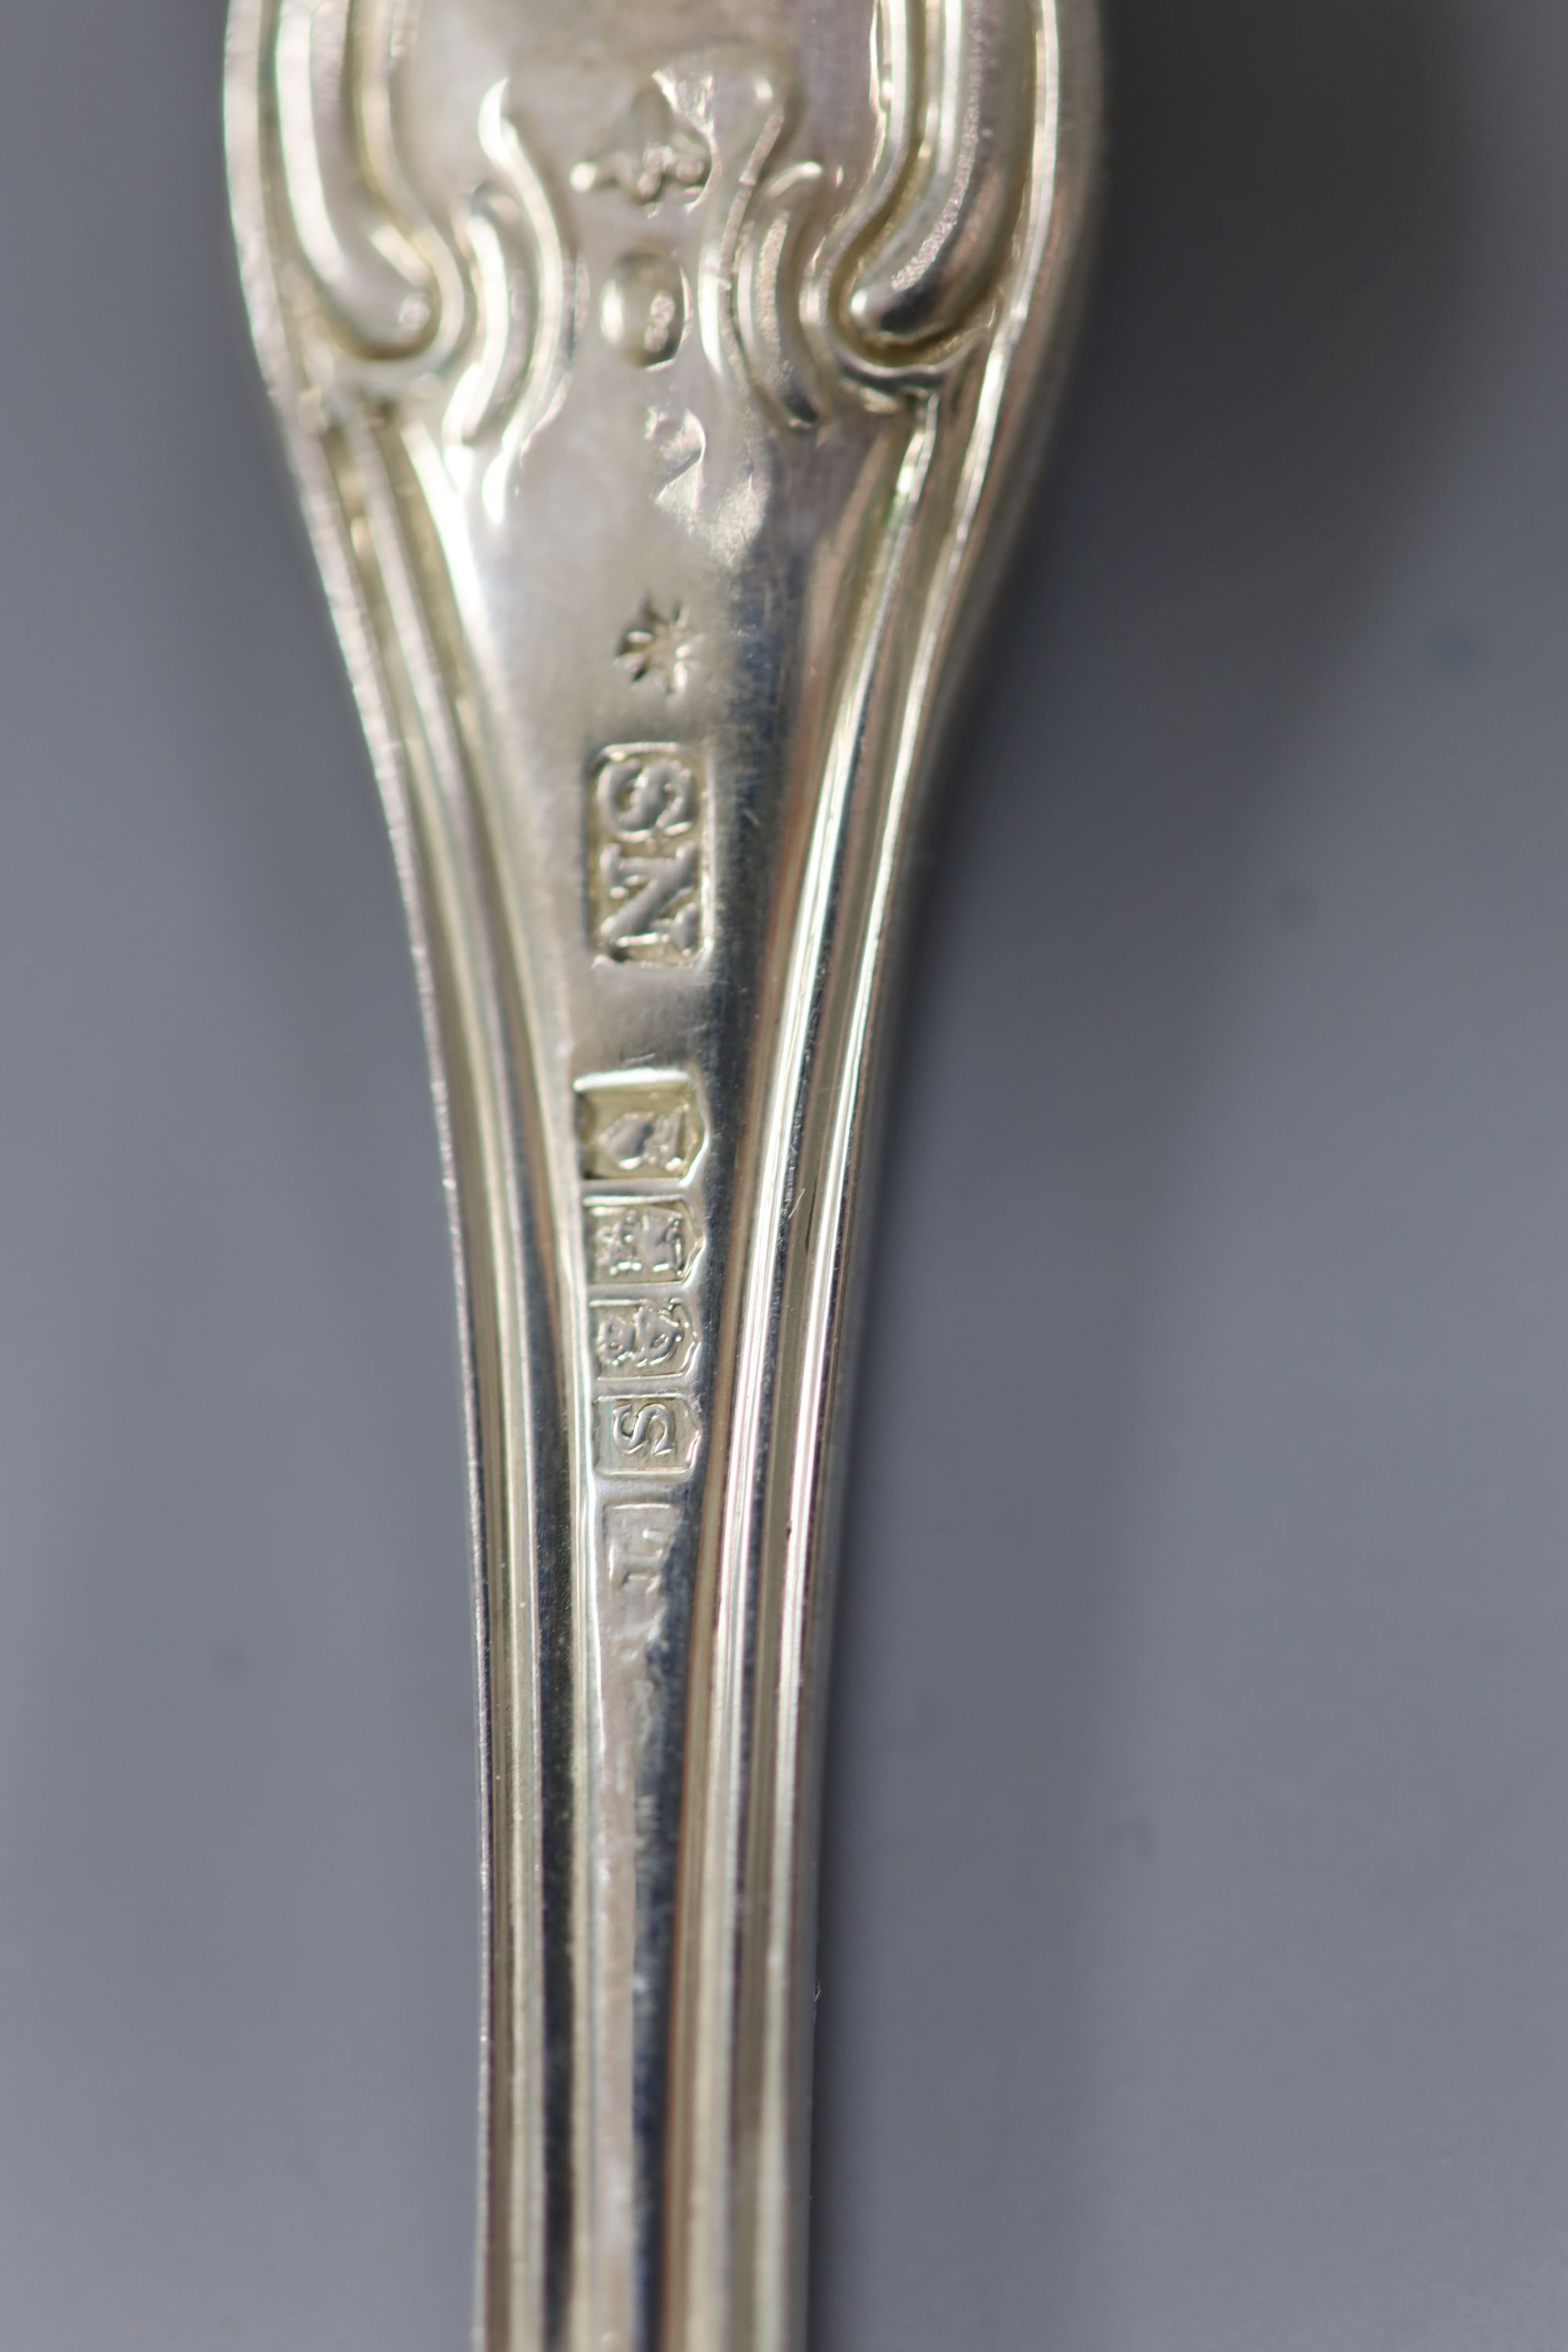 A set of six George III Irish silver hourglass pattern table spoons and four table forks, Dublin, 1813/4, Edwd. Twycross, 32oz.